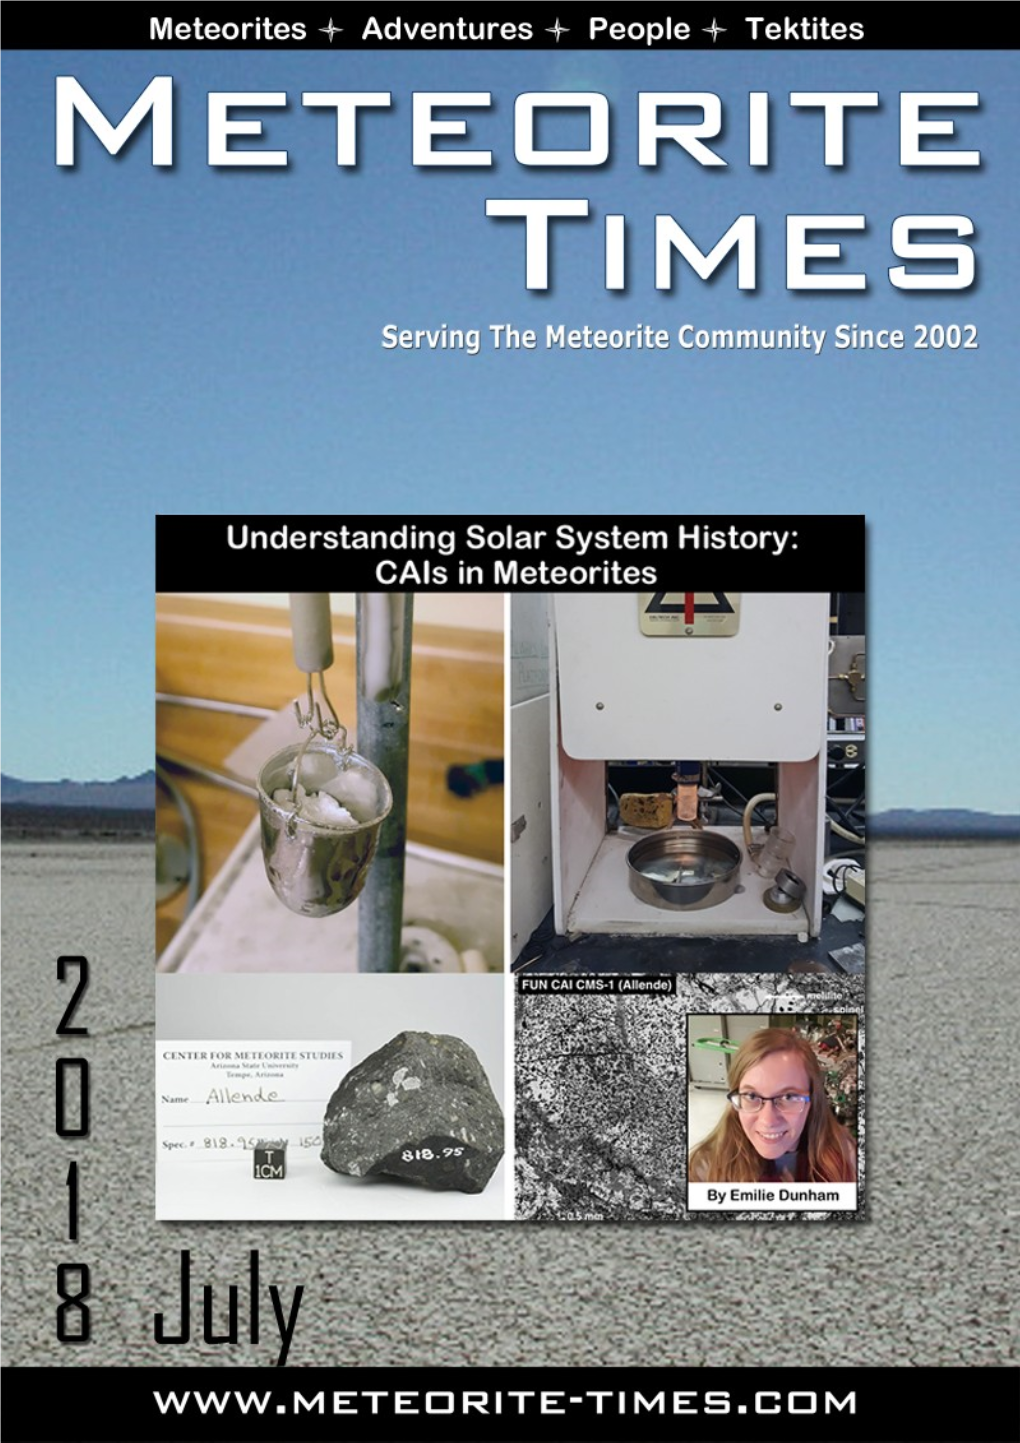 July Publication of Meteorite- Times Magazine